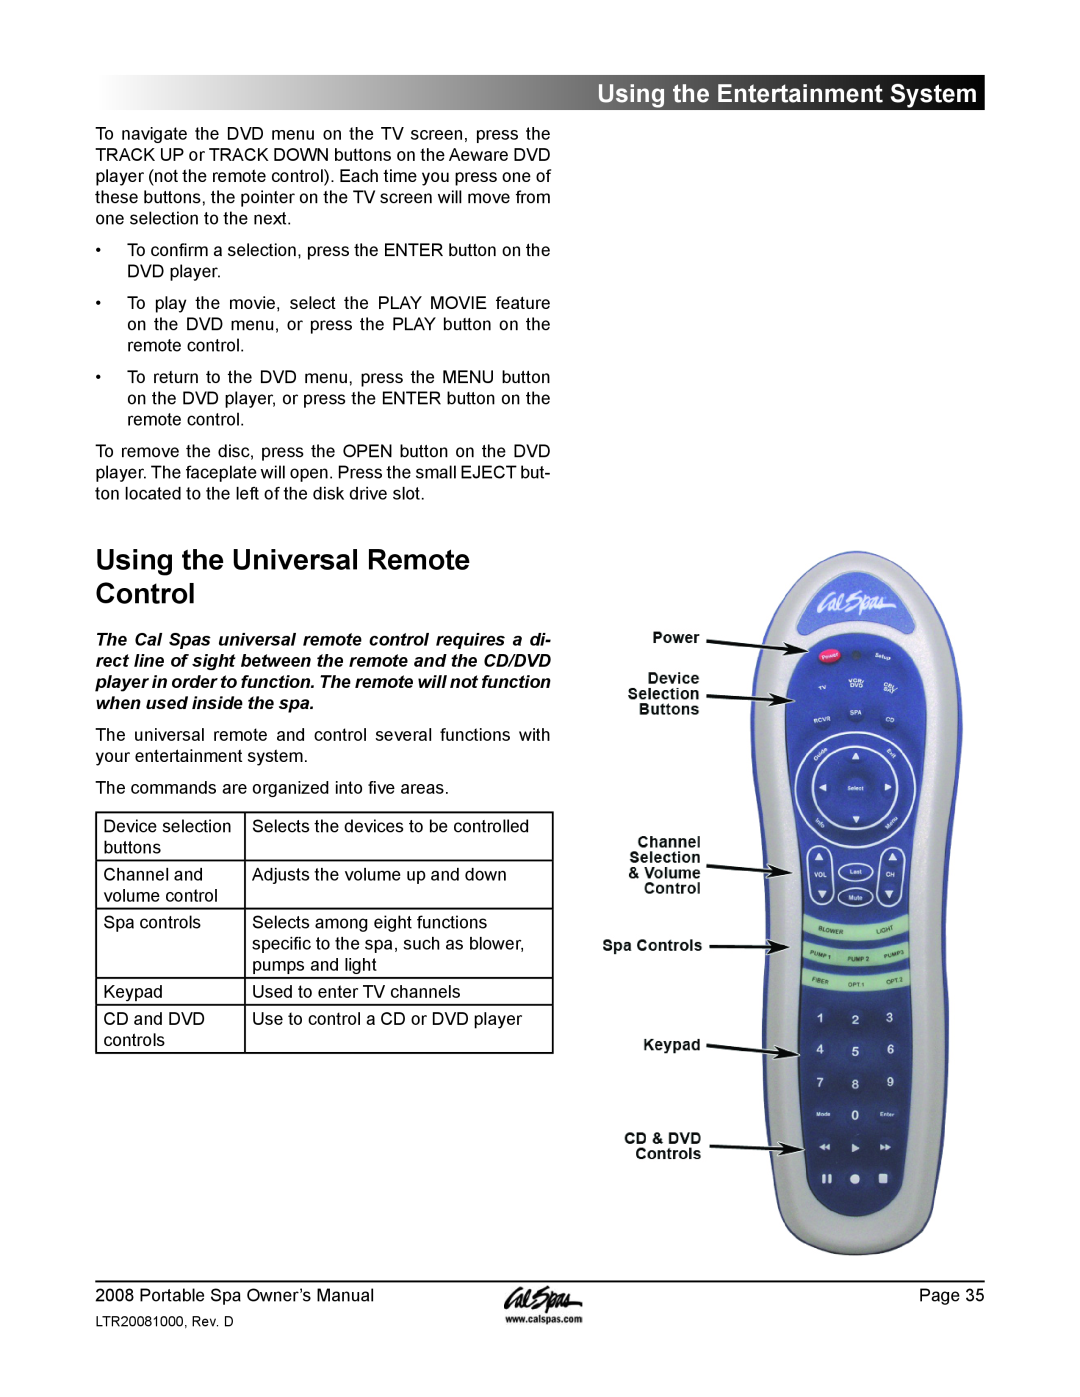 Cal Spas GFCI manual Using the Universal Remote Control, Using the Entertainment System 